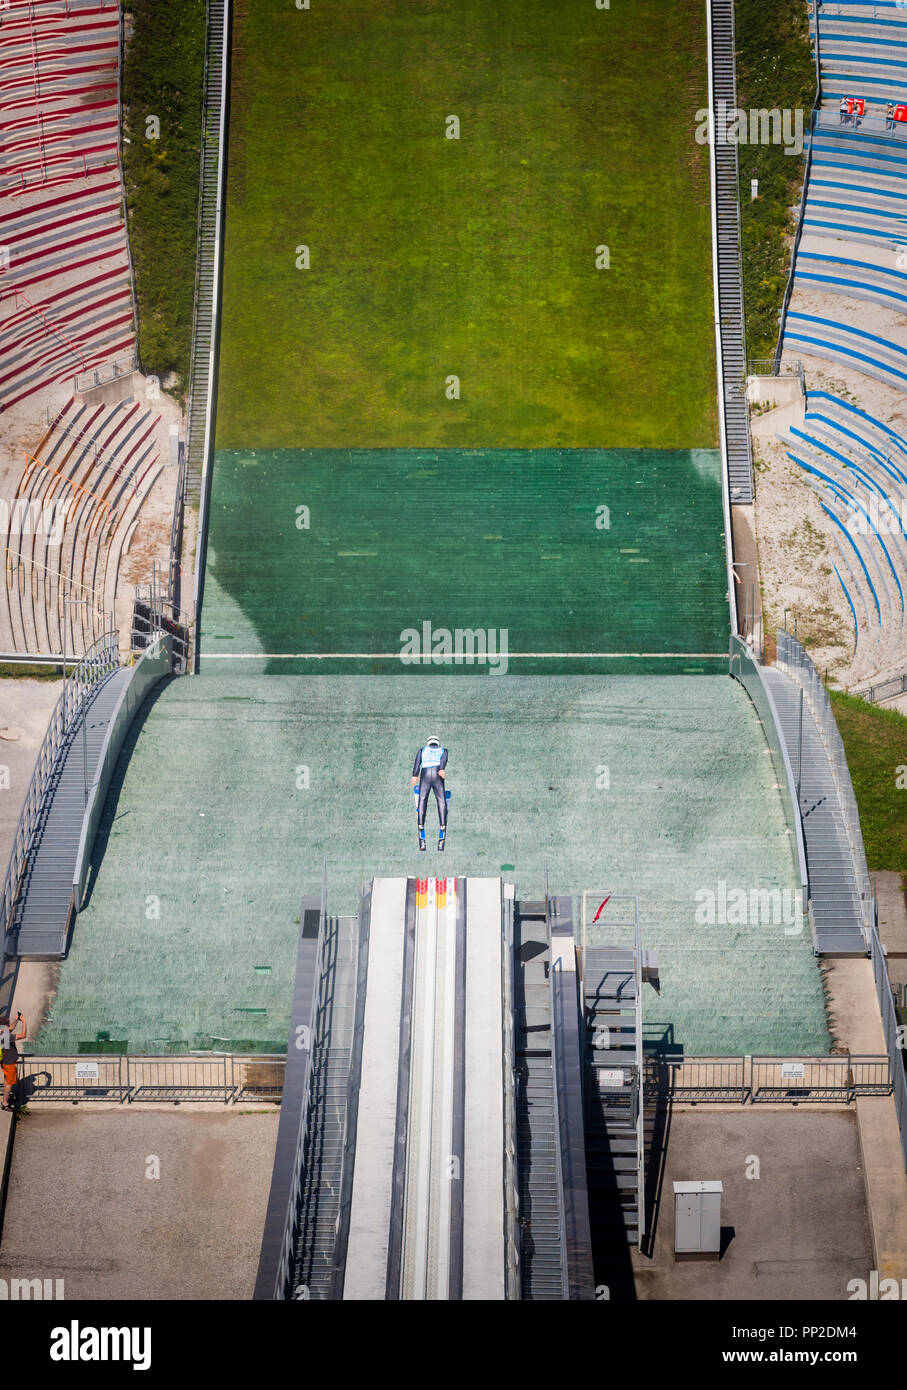 A ski jumper is taking off the Bergisel Ski Jump in Innsbruck (Austria) during a summer training jump on August 1st, 2018. Stock Photo